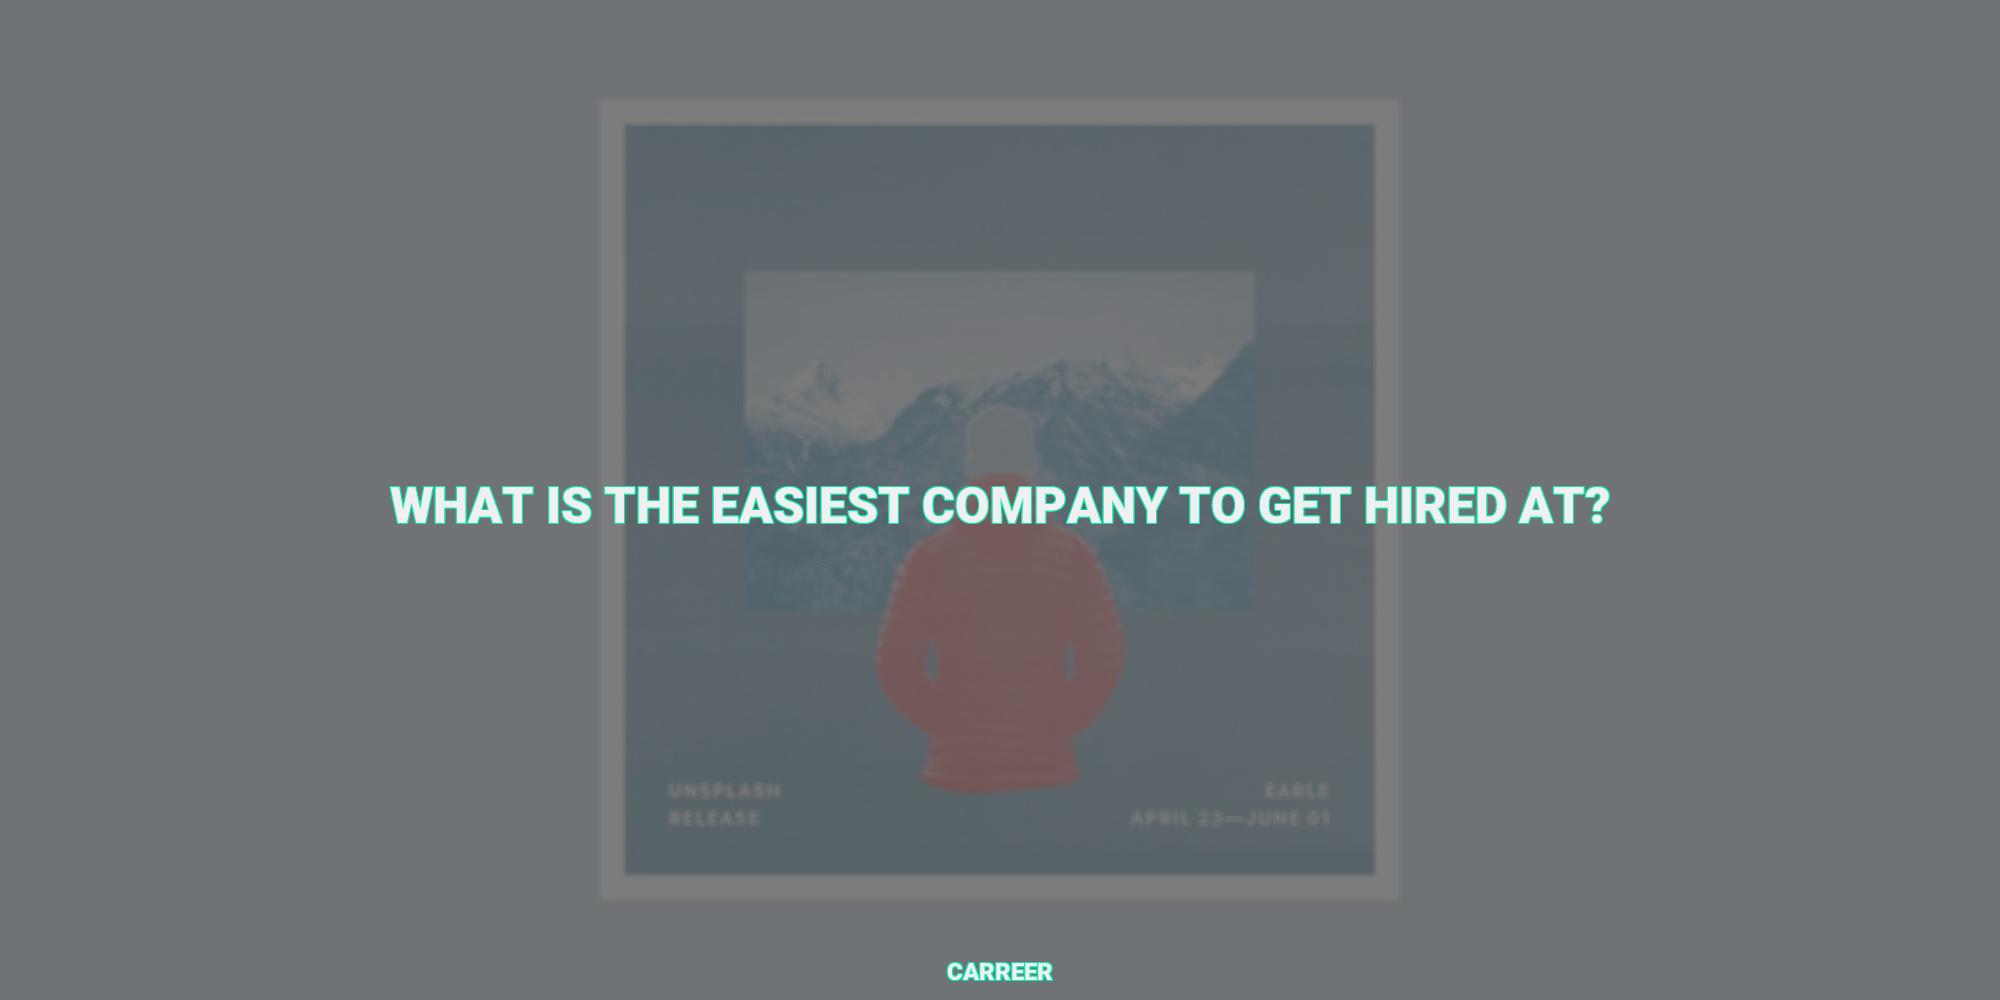 What is the easiest company to get hired at?